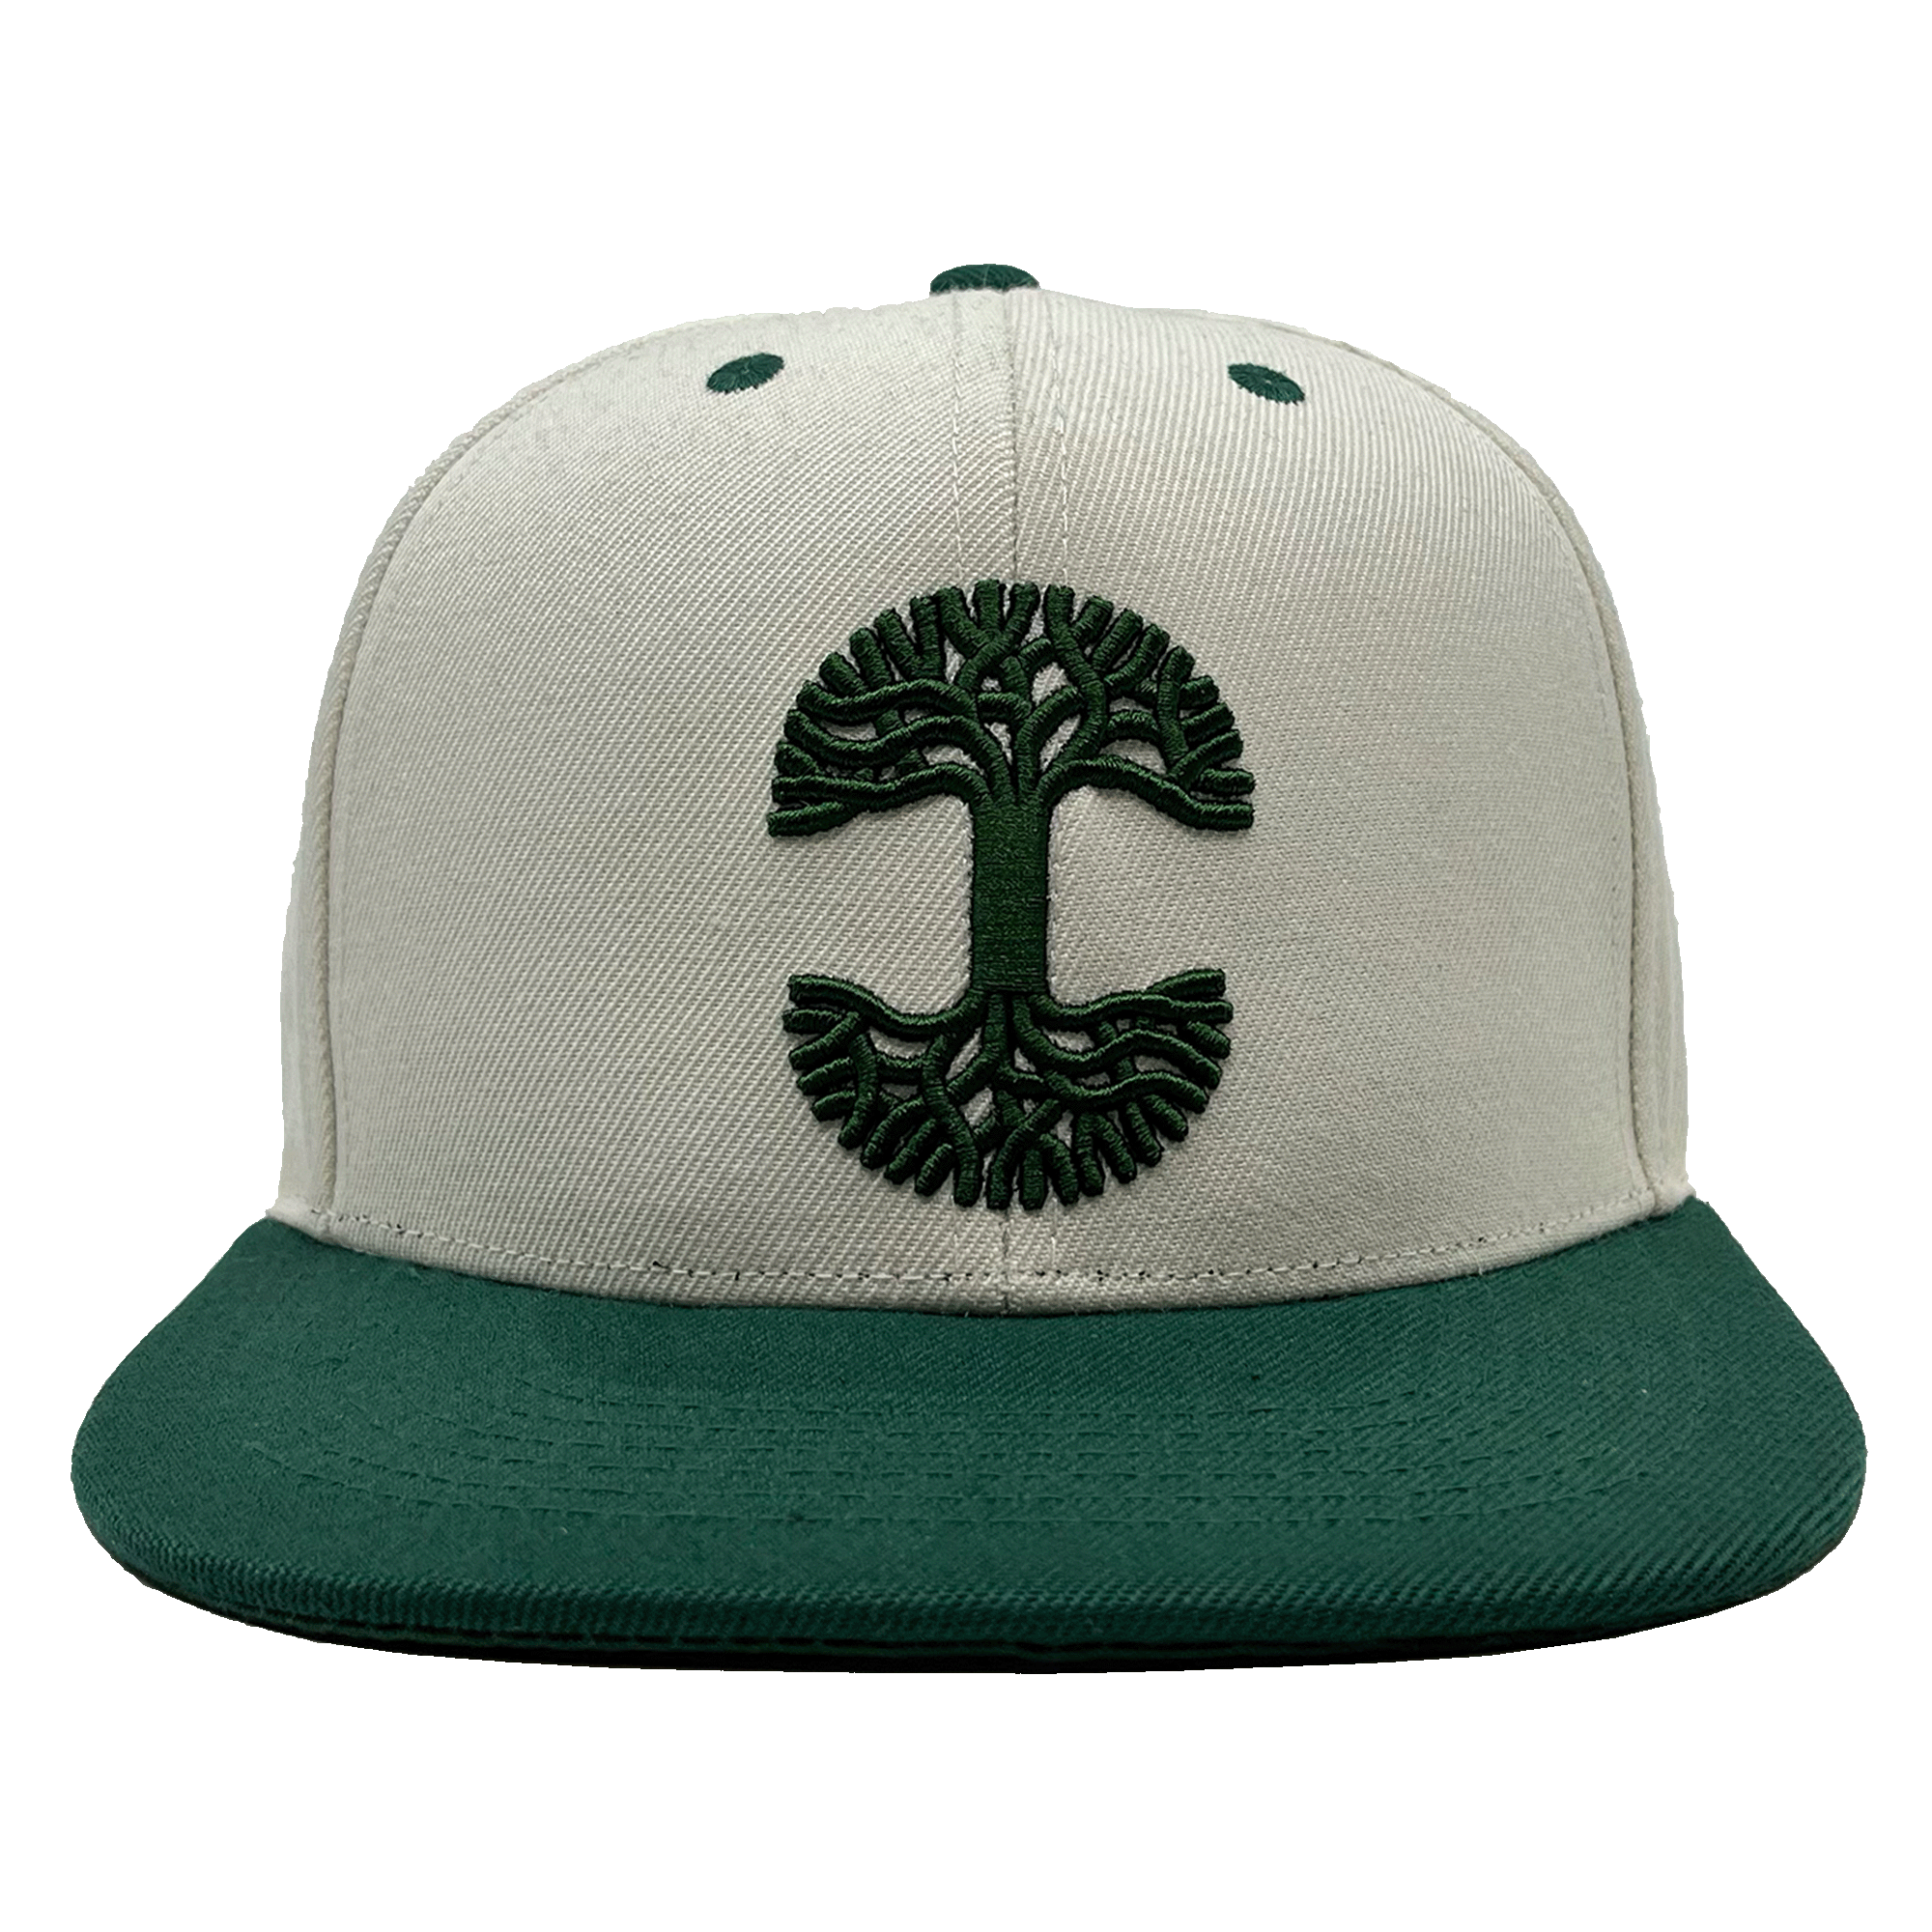 Front view of a white hat with green bill and green embroidered Oaklandish tree logo on the front crown.